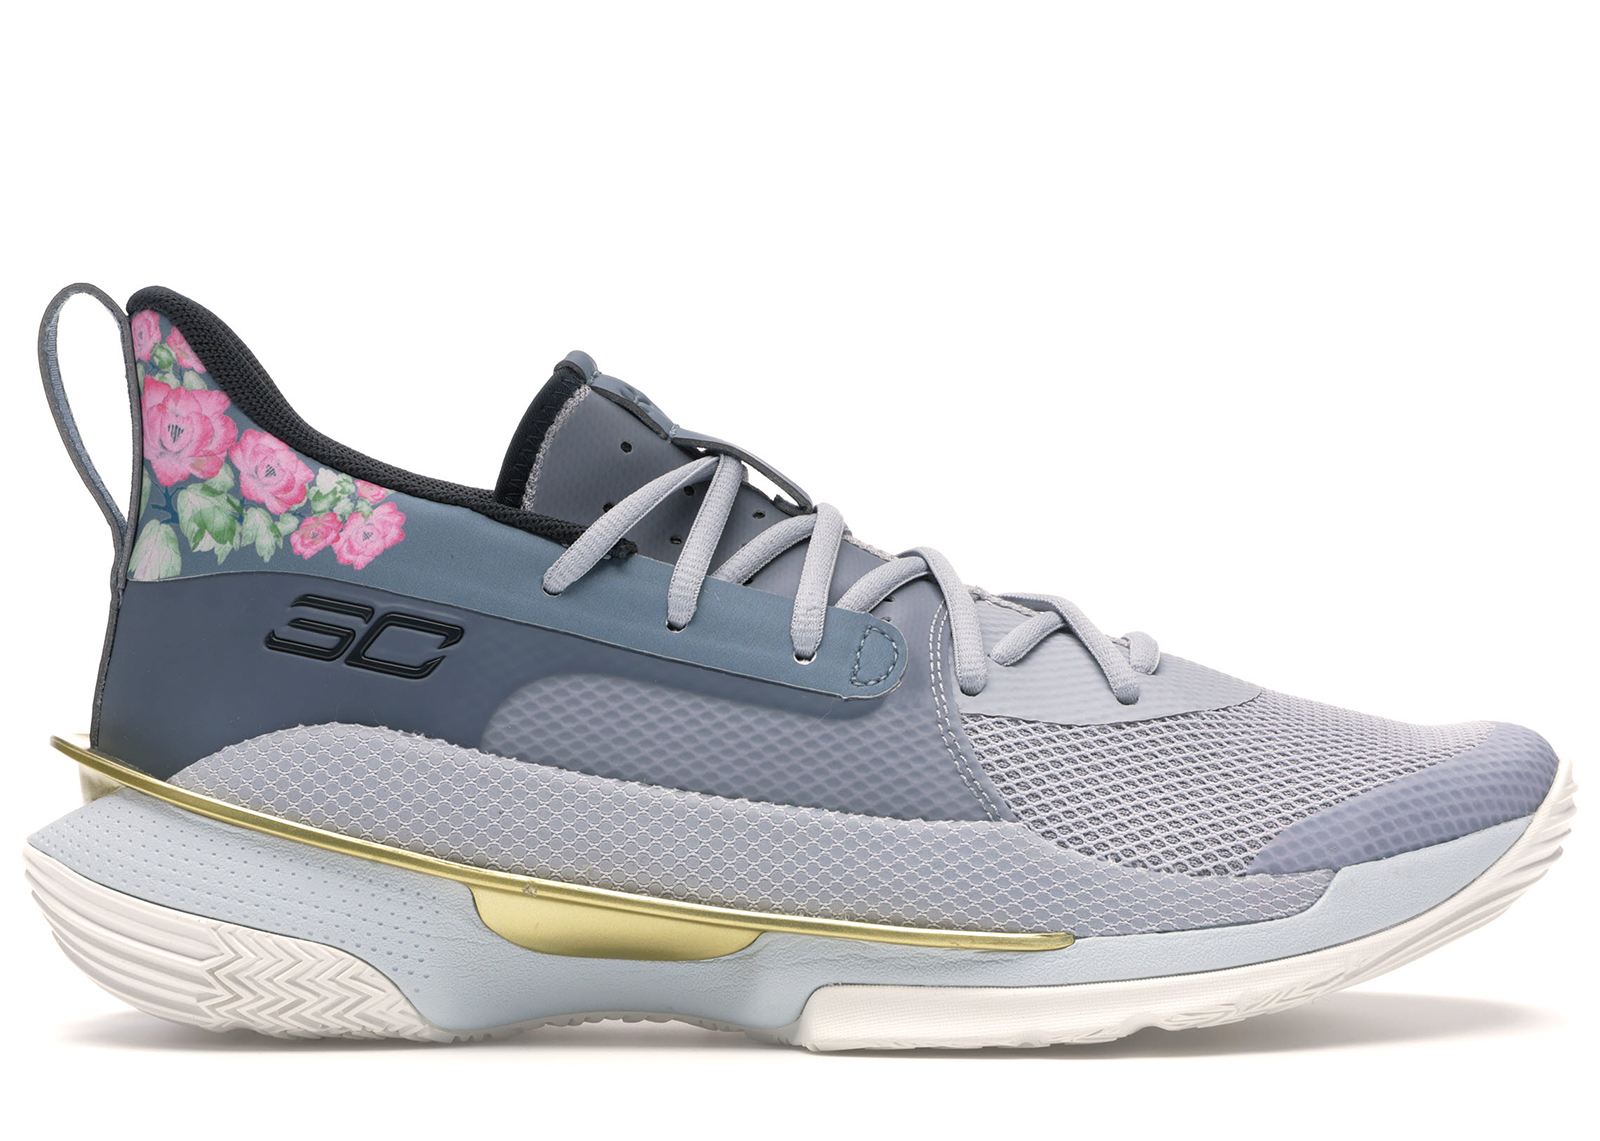 Under Armour Curry 7 Floral Chinese New Year (2020) Men's